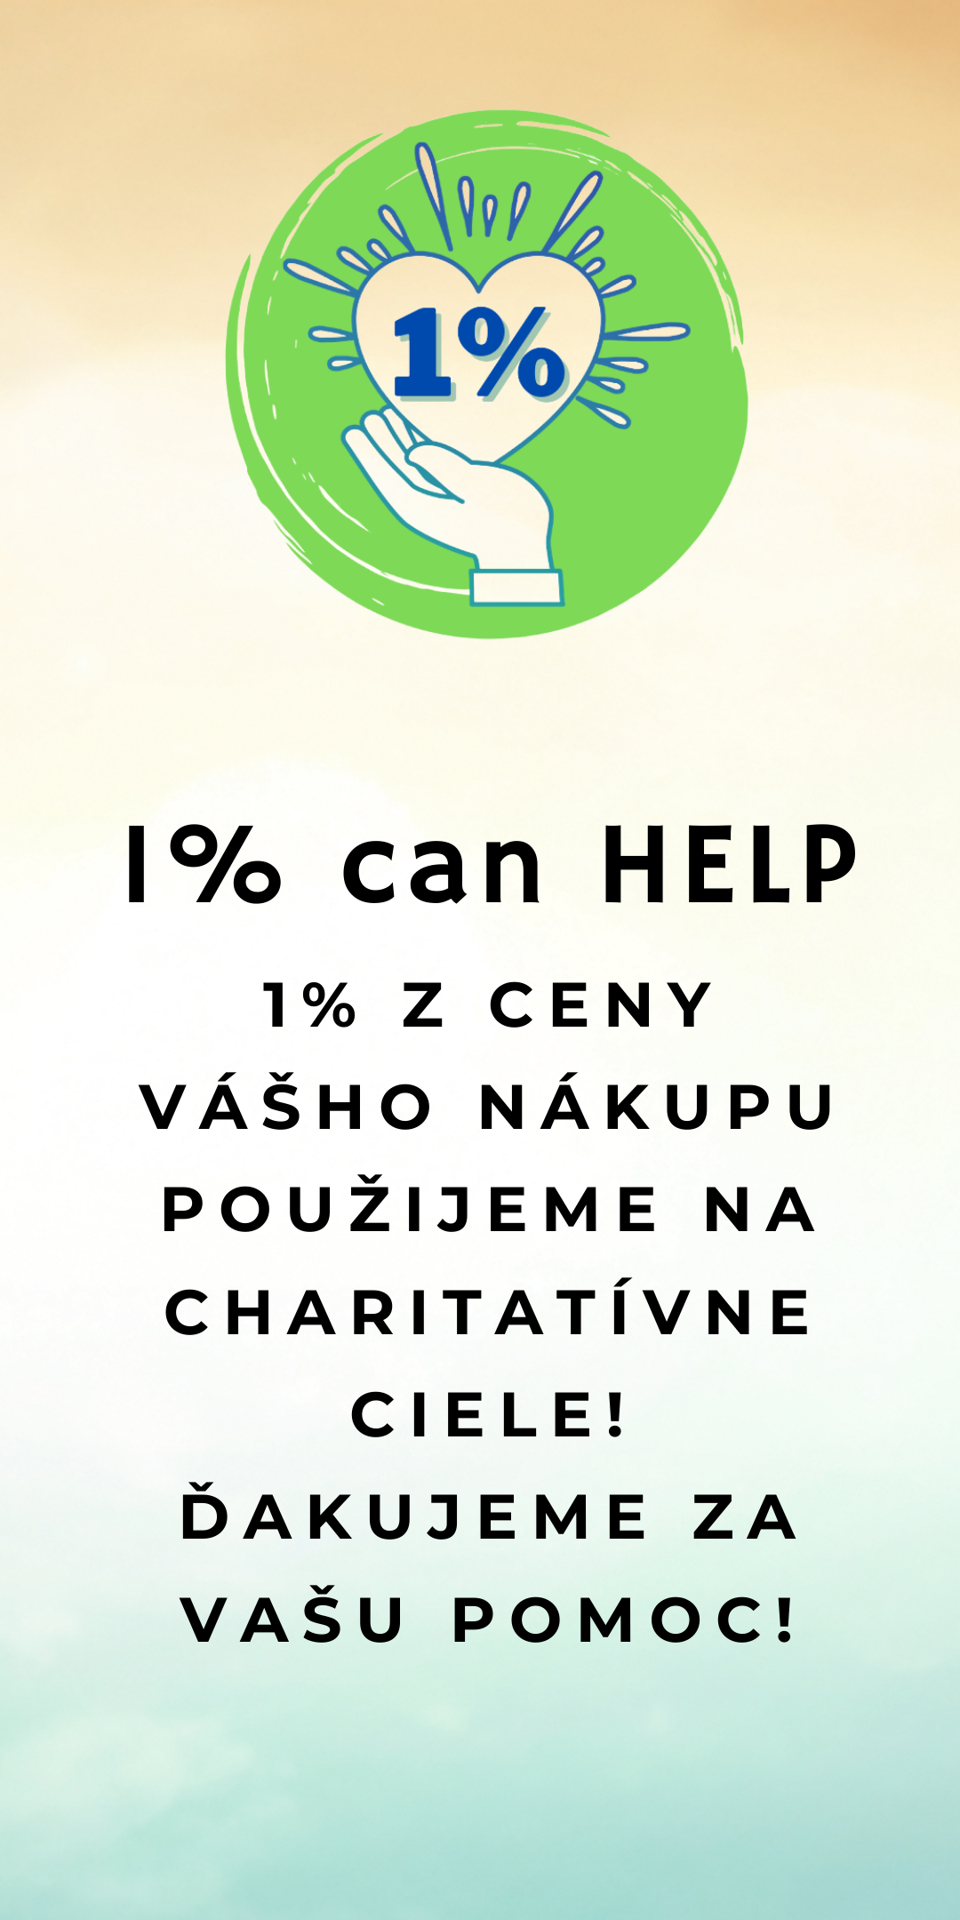 1% can help